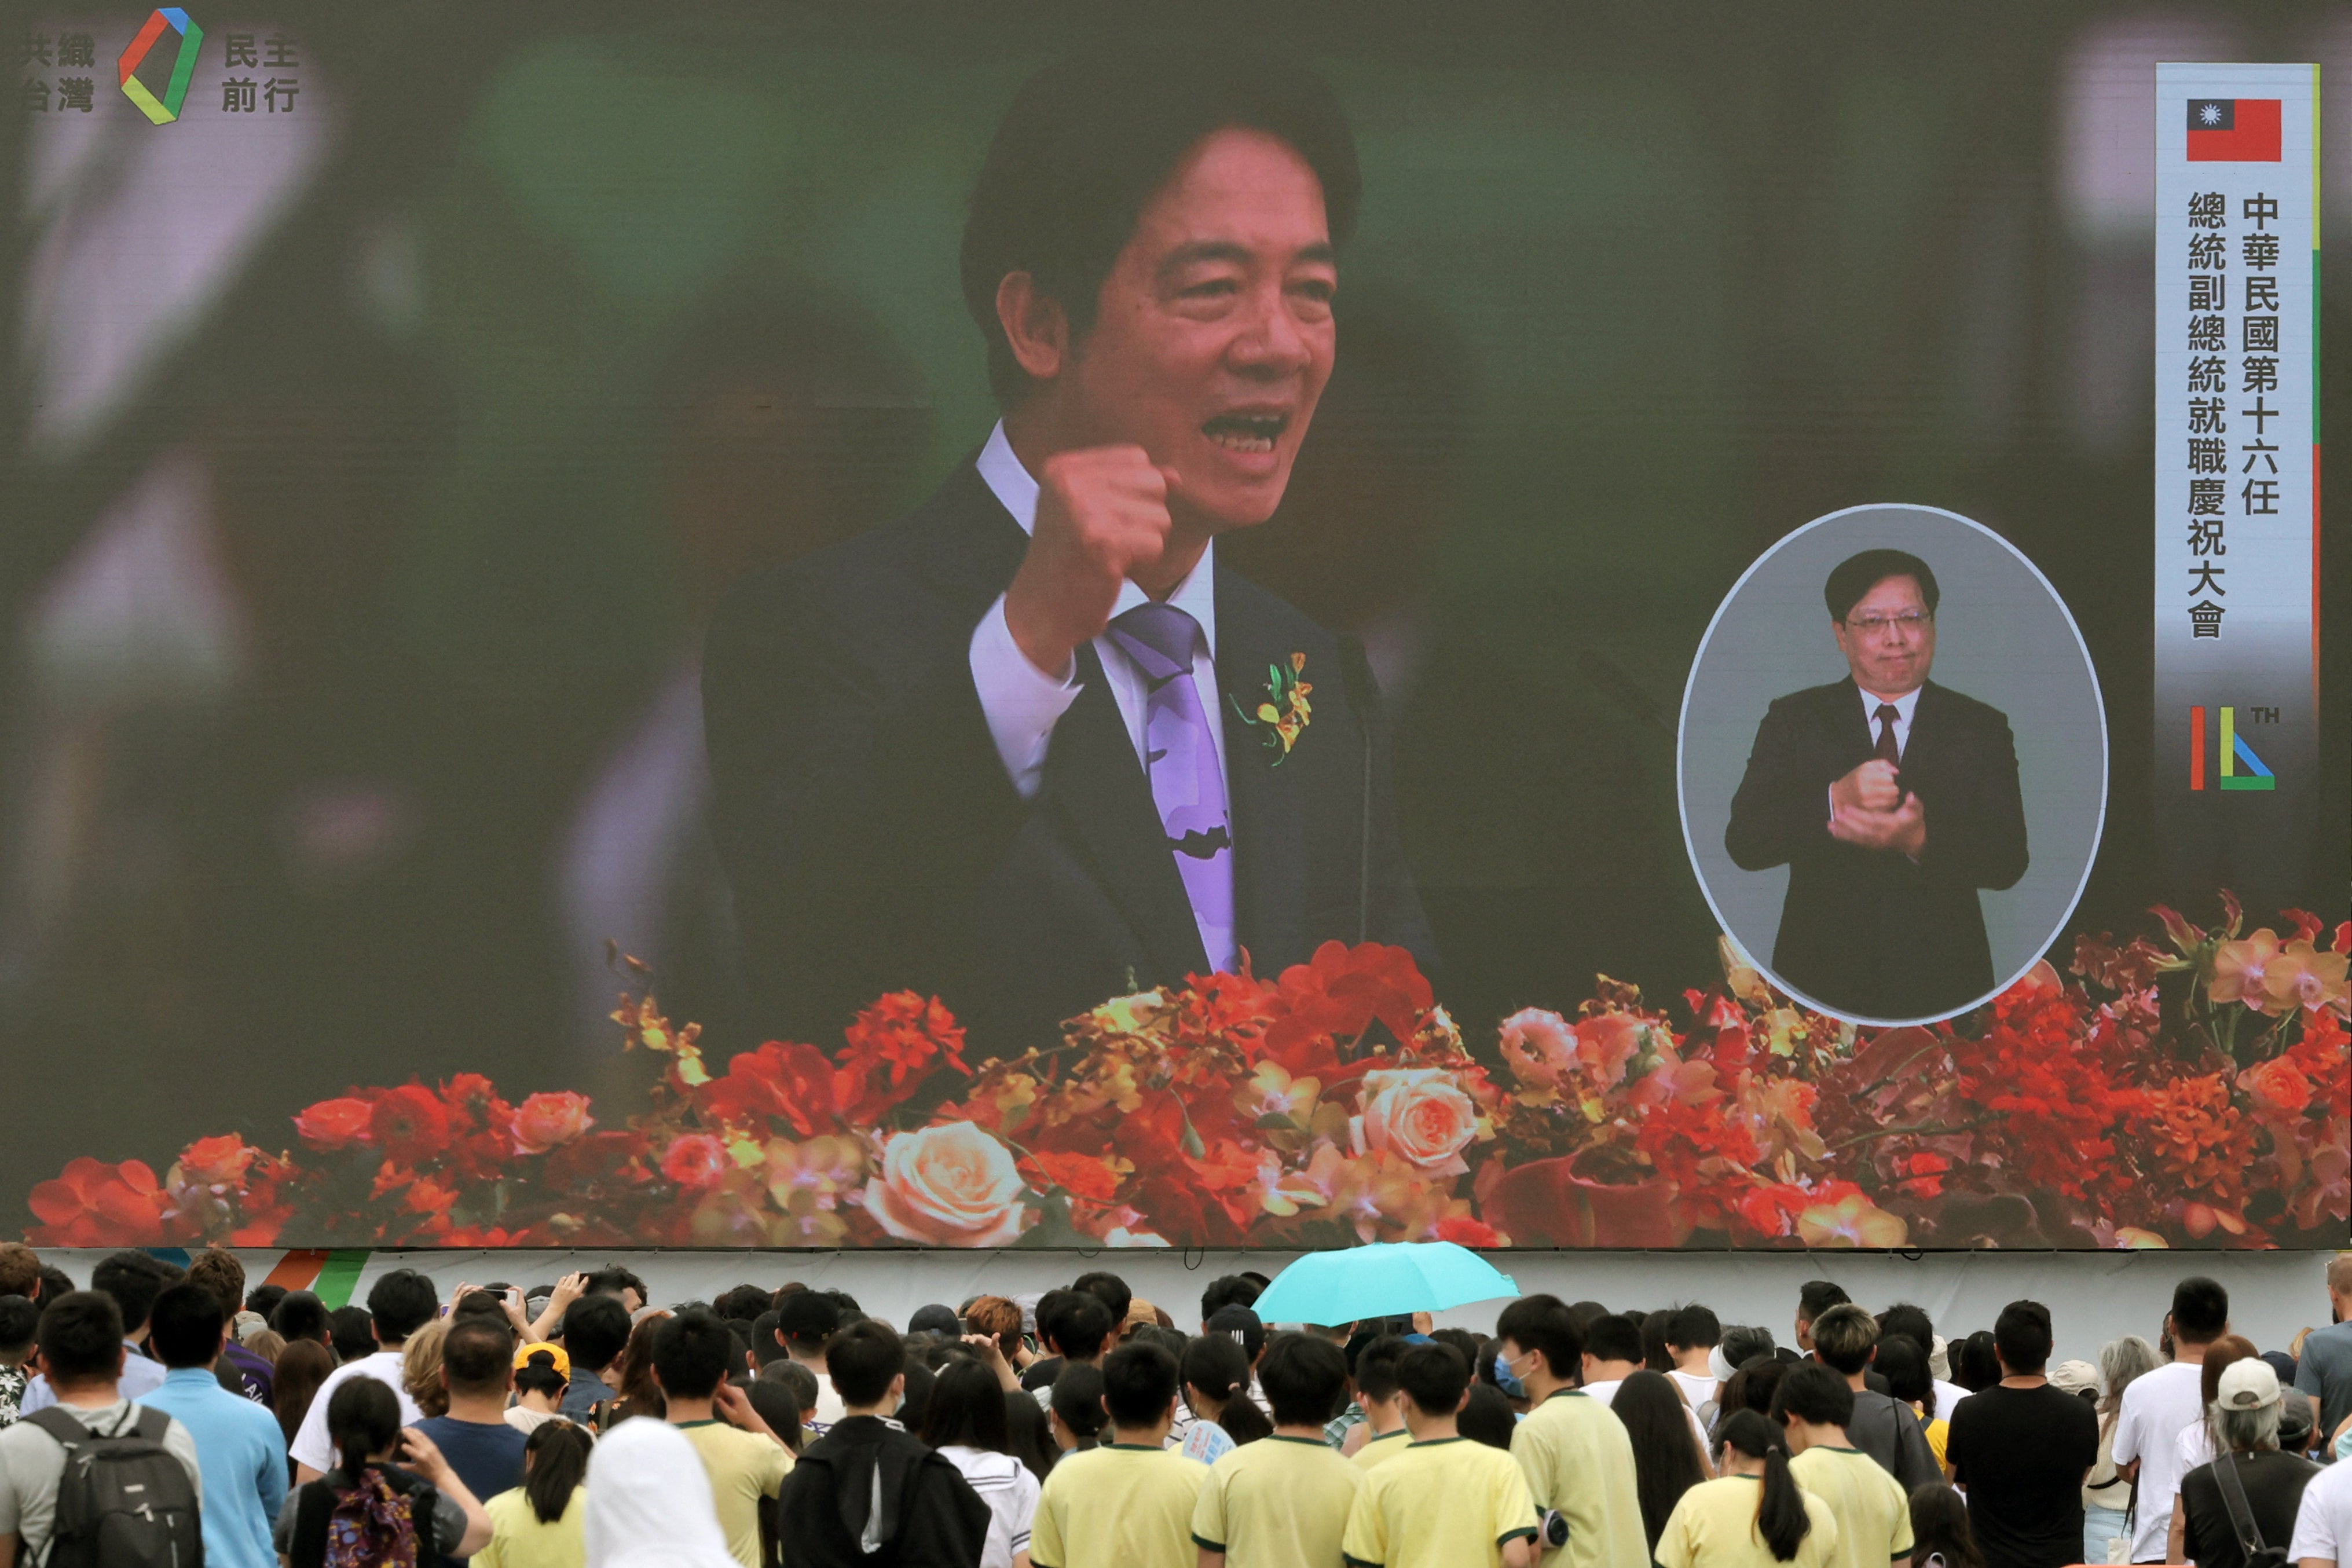 A screen shows Lai Ching-te delivering his inaugural speech as president